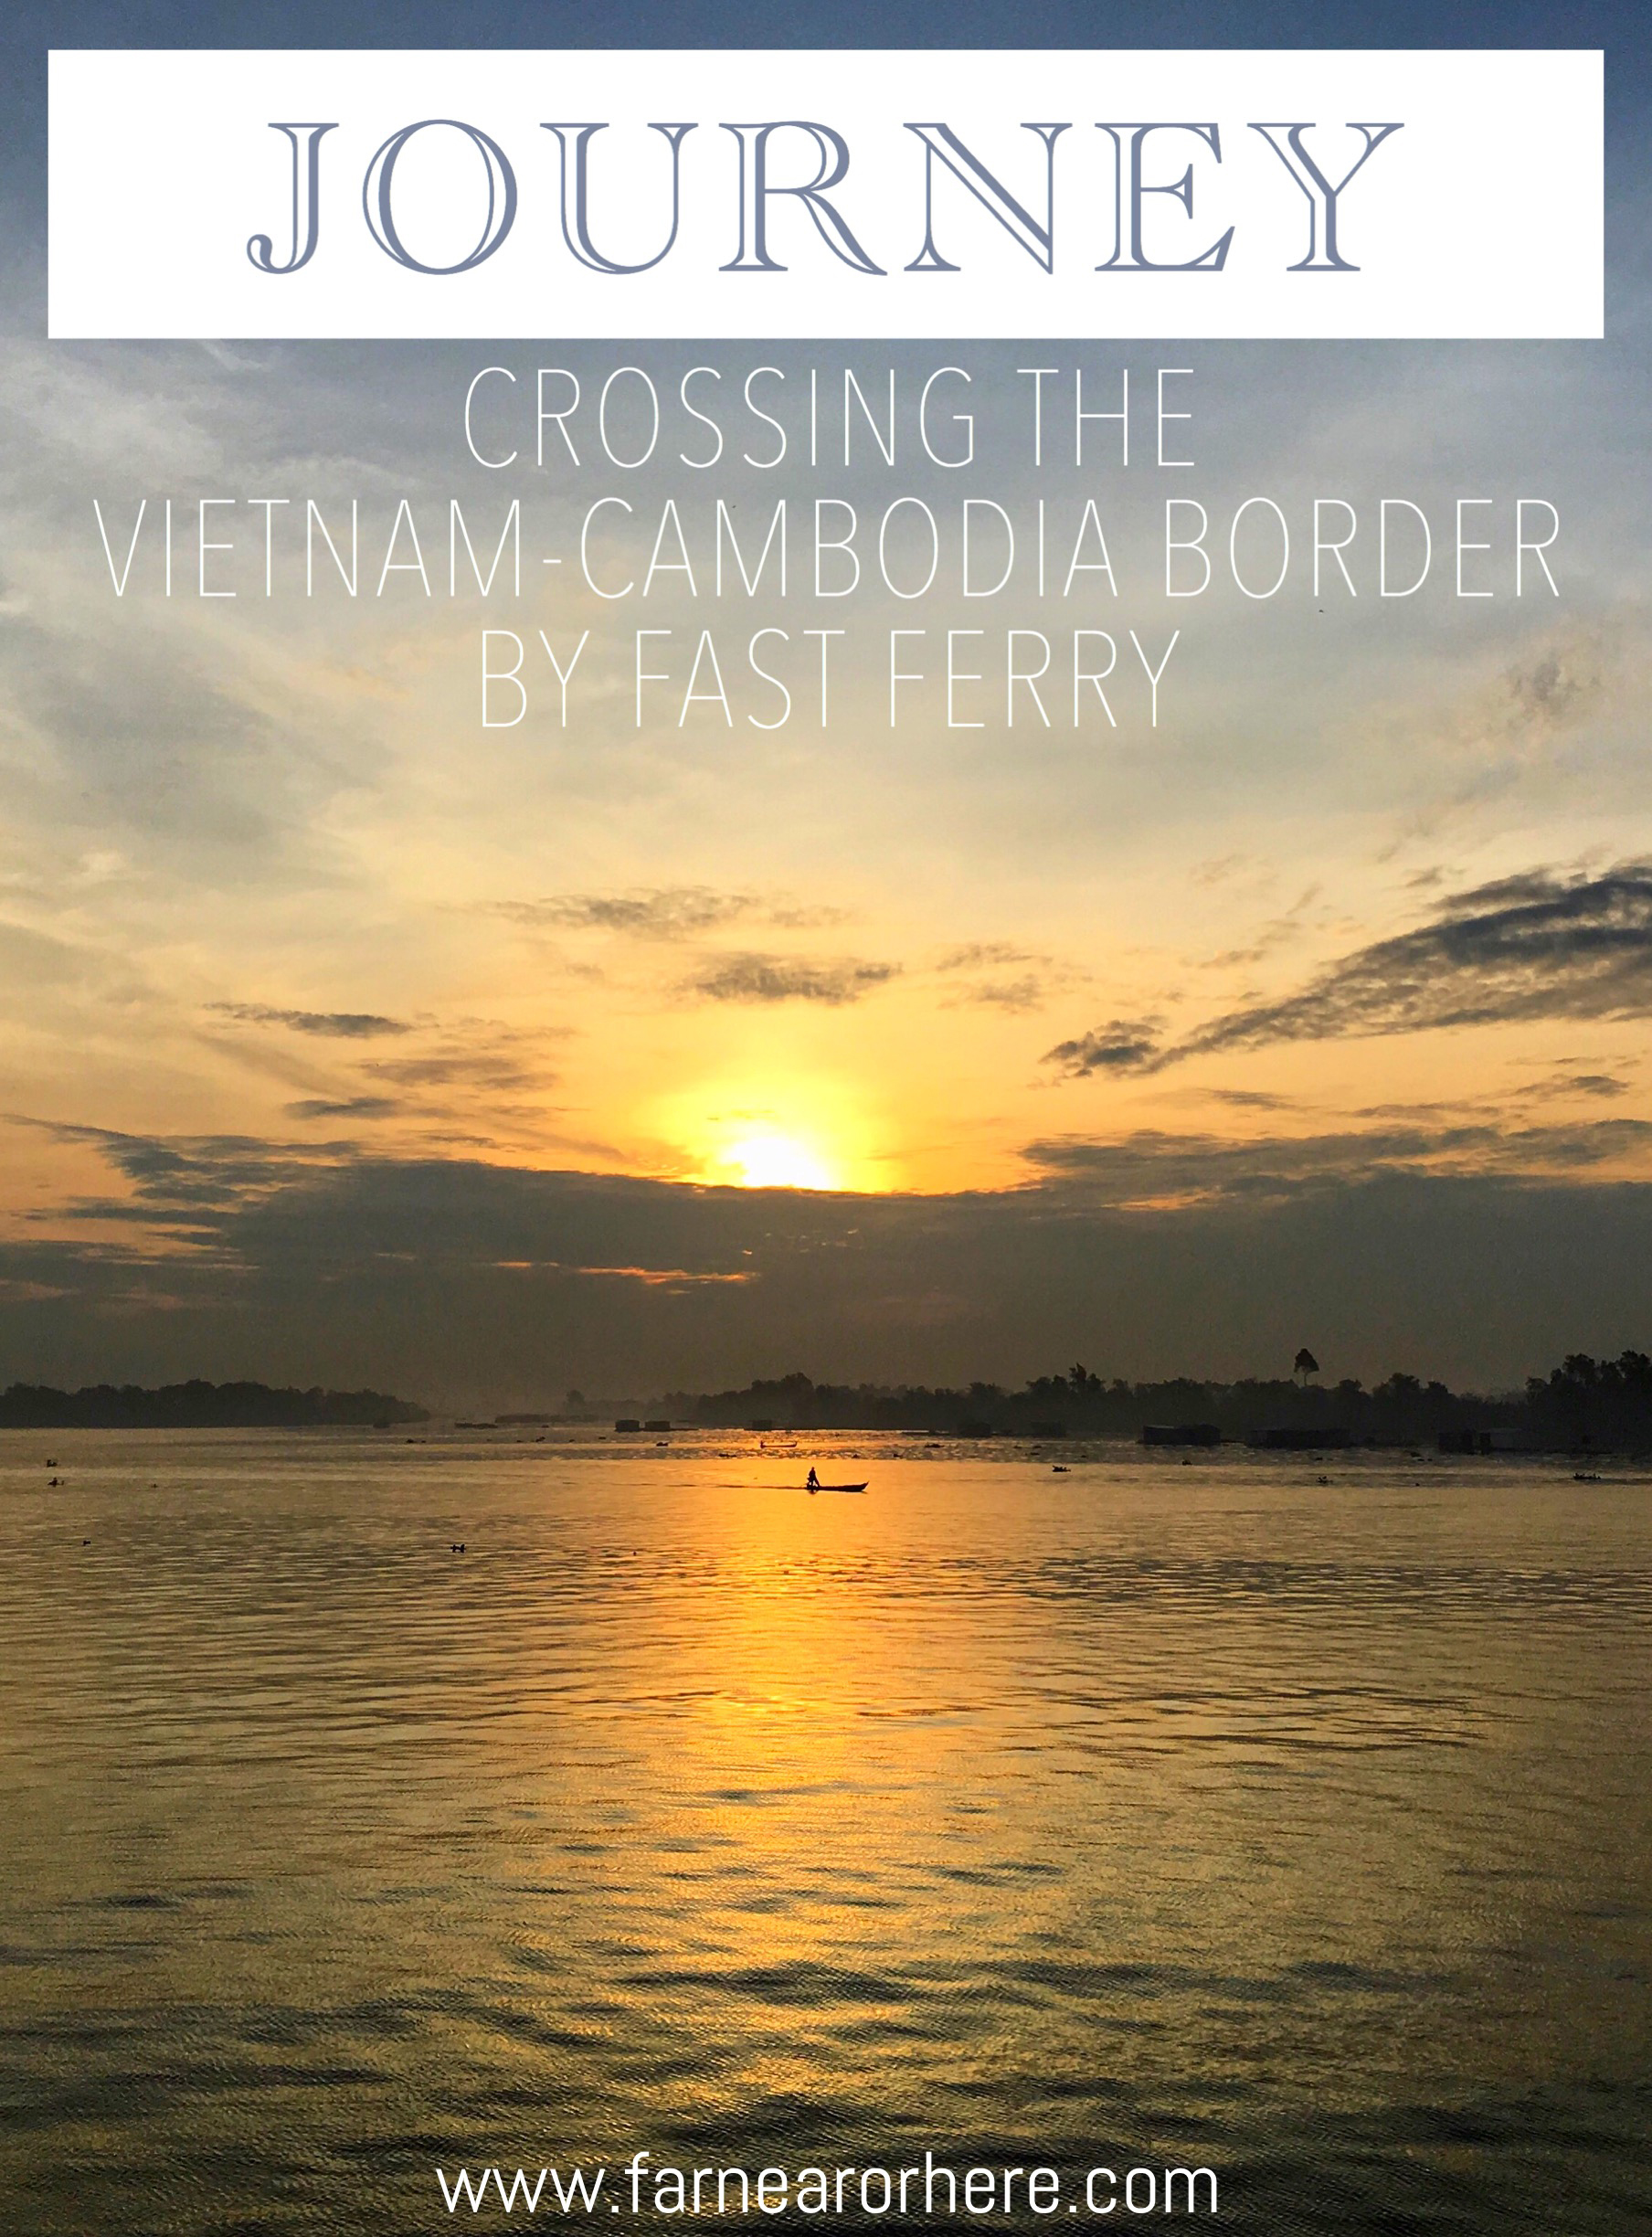 Crossing the Vietnam-Camboadiag the Mekong River from Chau Duc to Phnom Penh